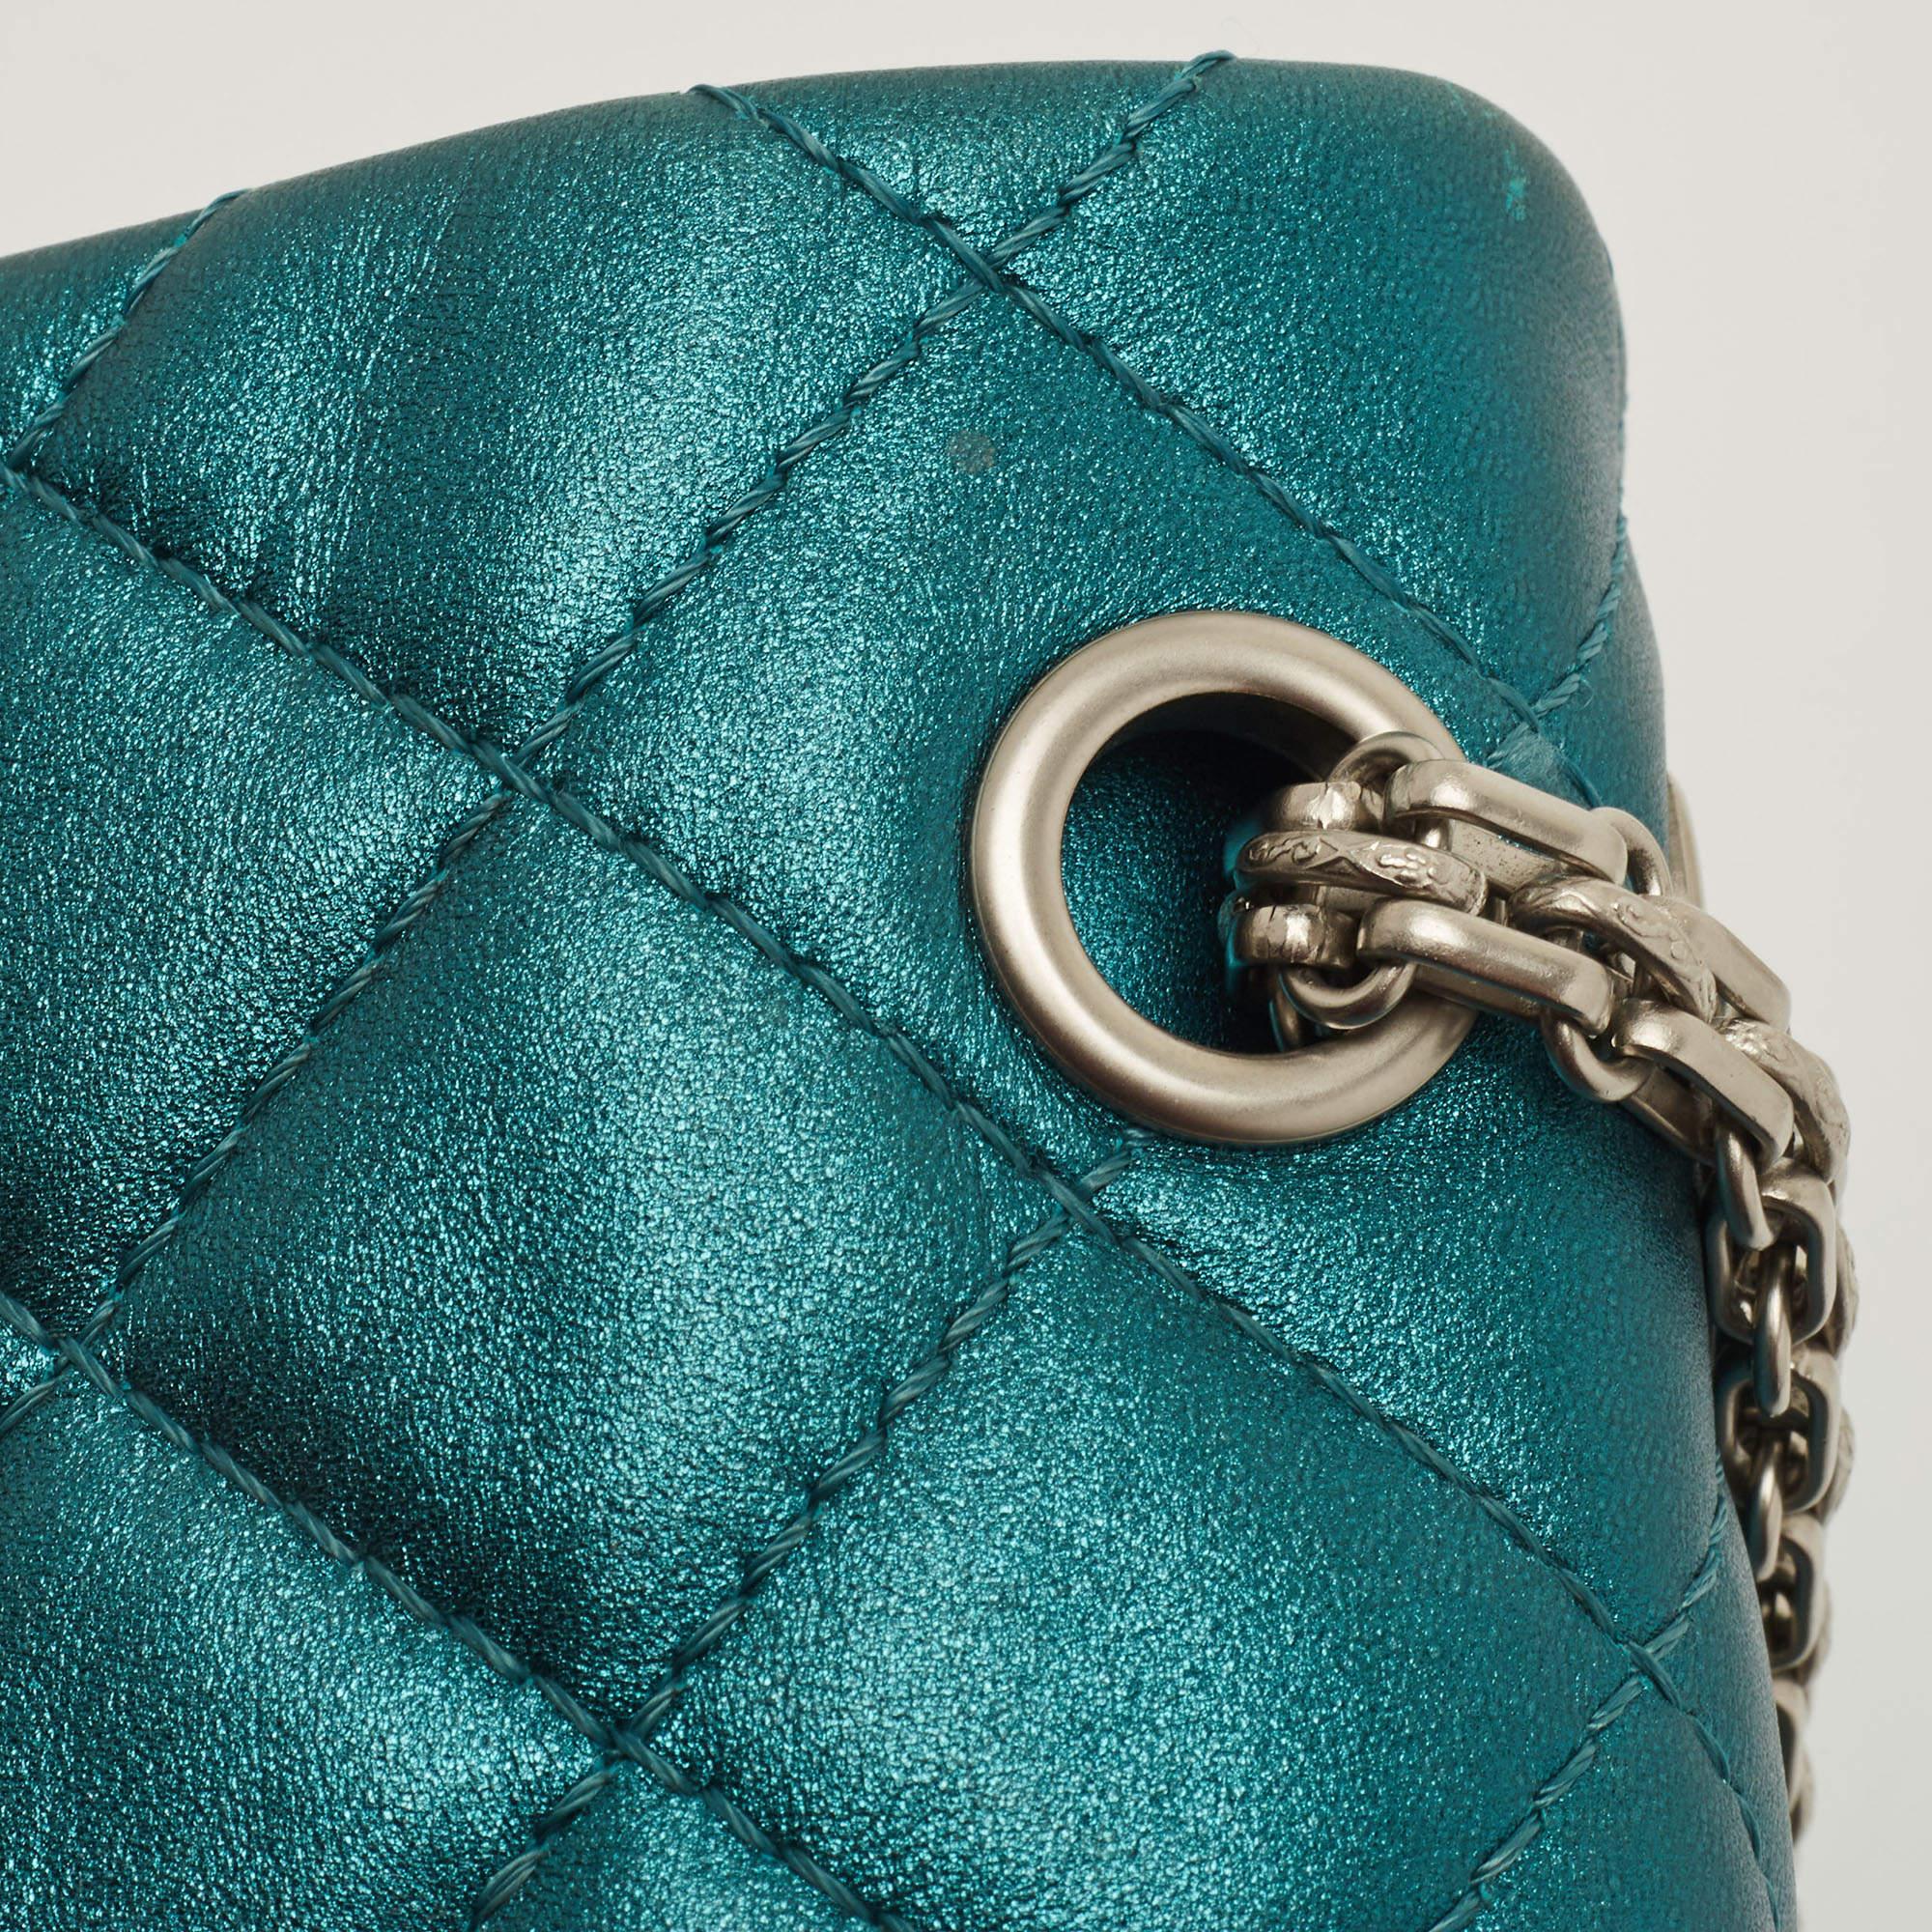 Chanel Metallic Teal Green Quilted Leather Reissue 2.55 Classic 226 Flap Bag For Sale 5